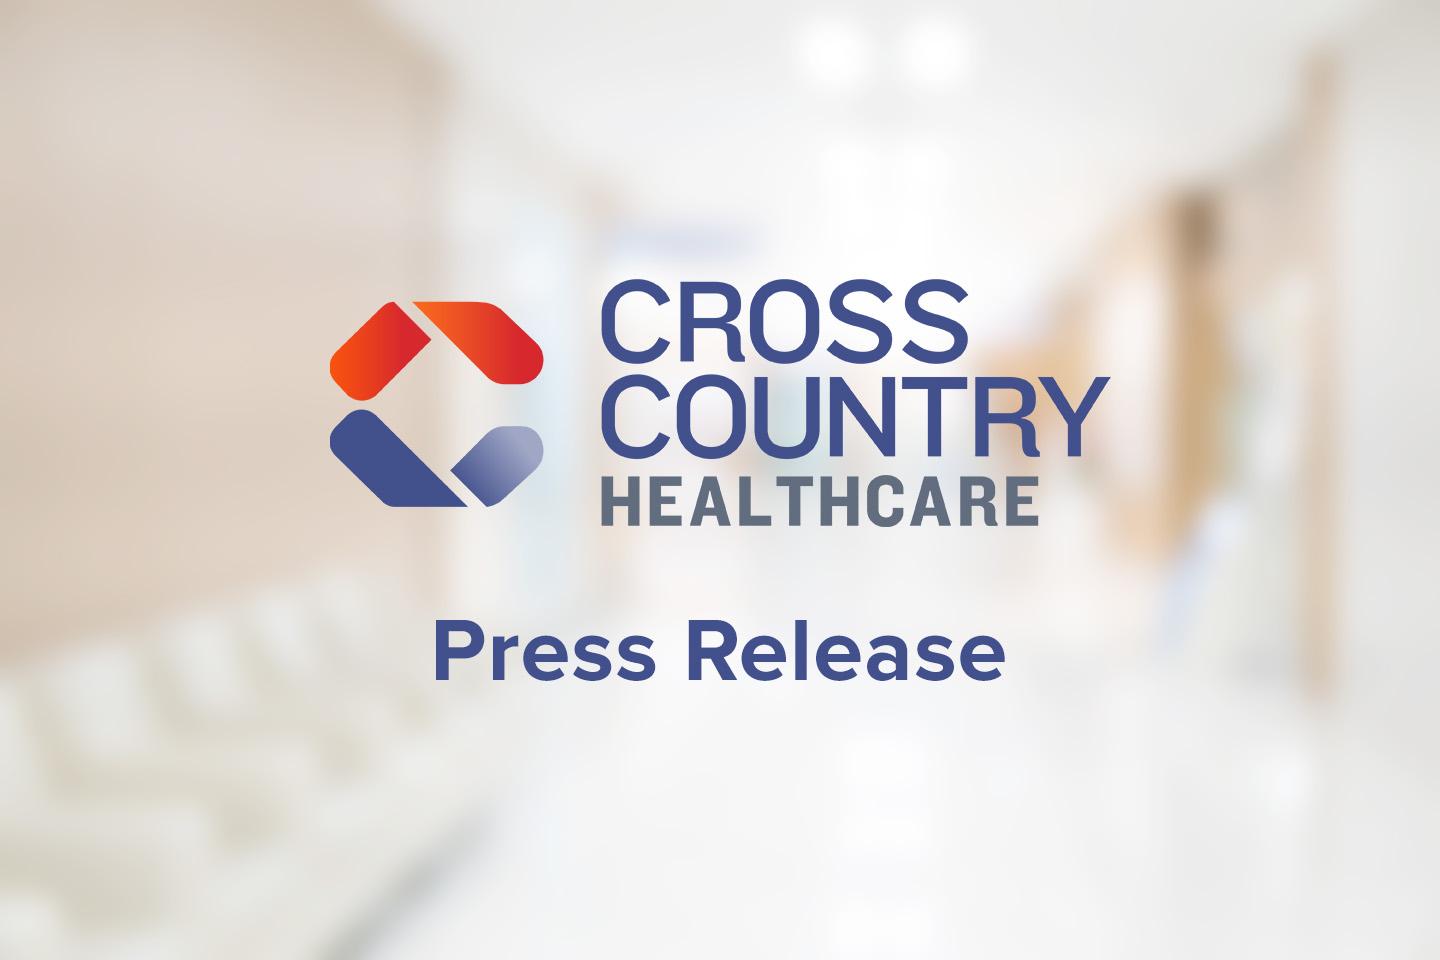 Cross Country Healthcare Announces Fourth Quarter and Full Year 2020 Earnings Release Date and Conference Call Information